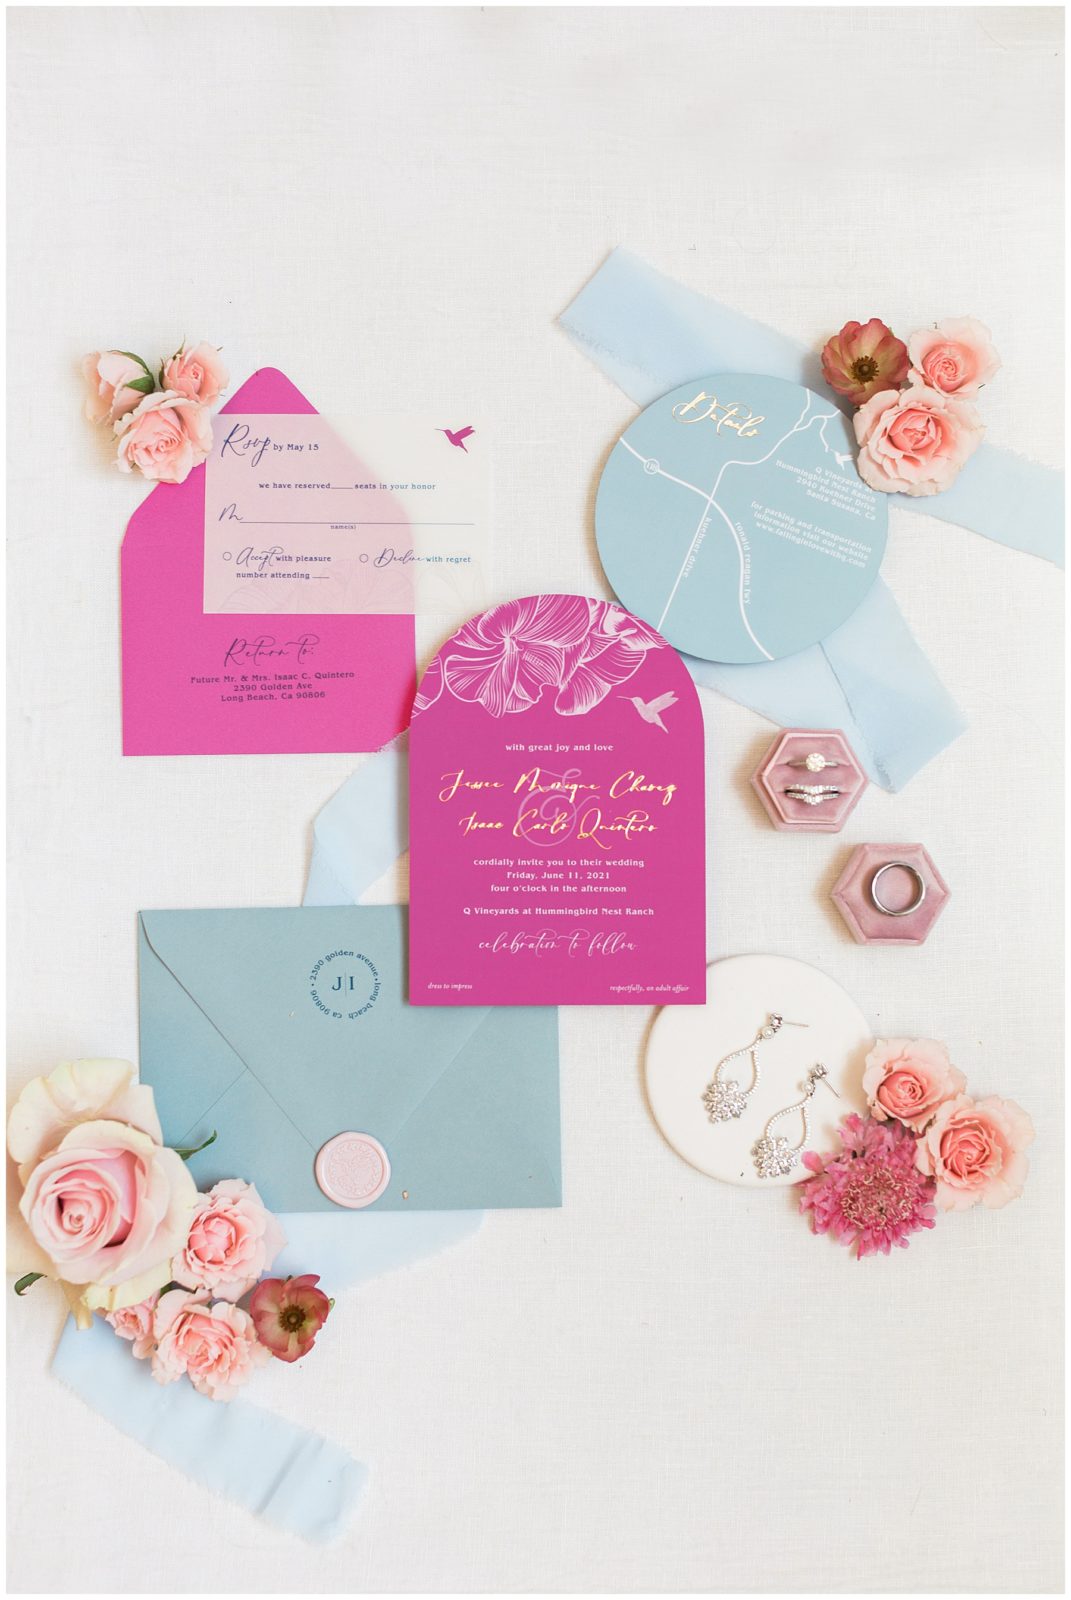 Bright pink and pale blue wedding invitation flatlay with jewelry